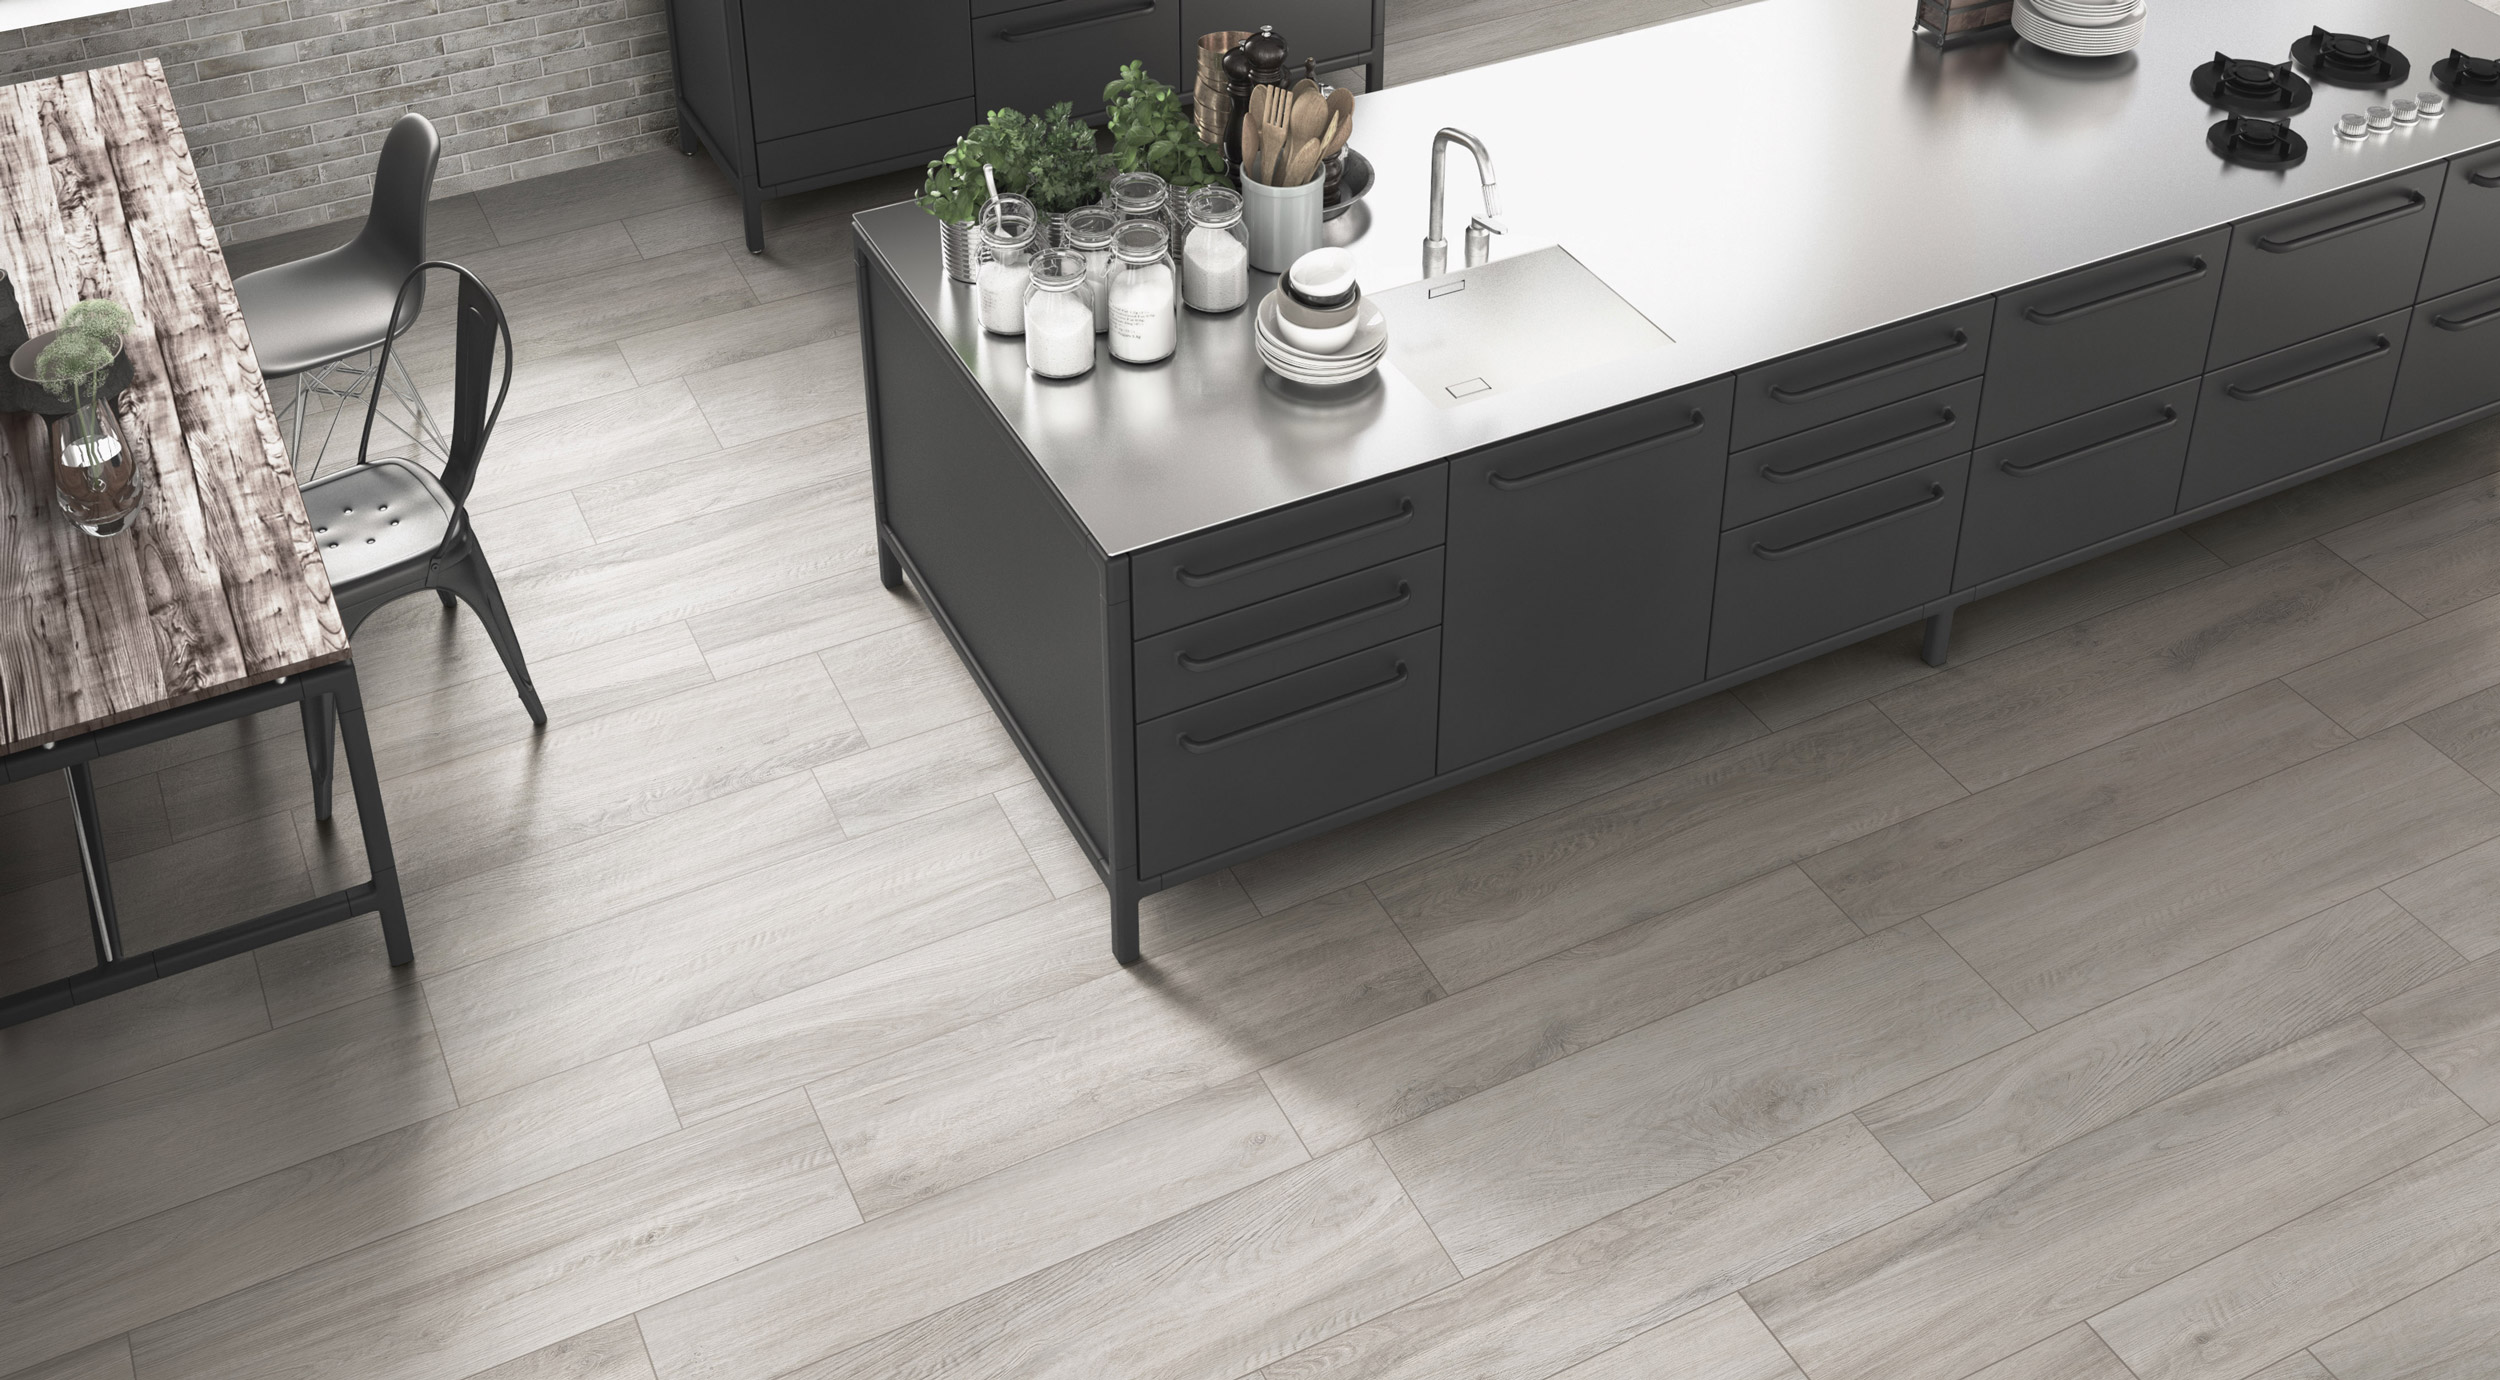 Kitchen tiles Ever by Ceramica Rondine